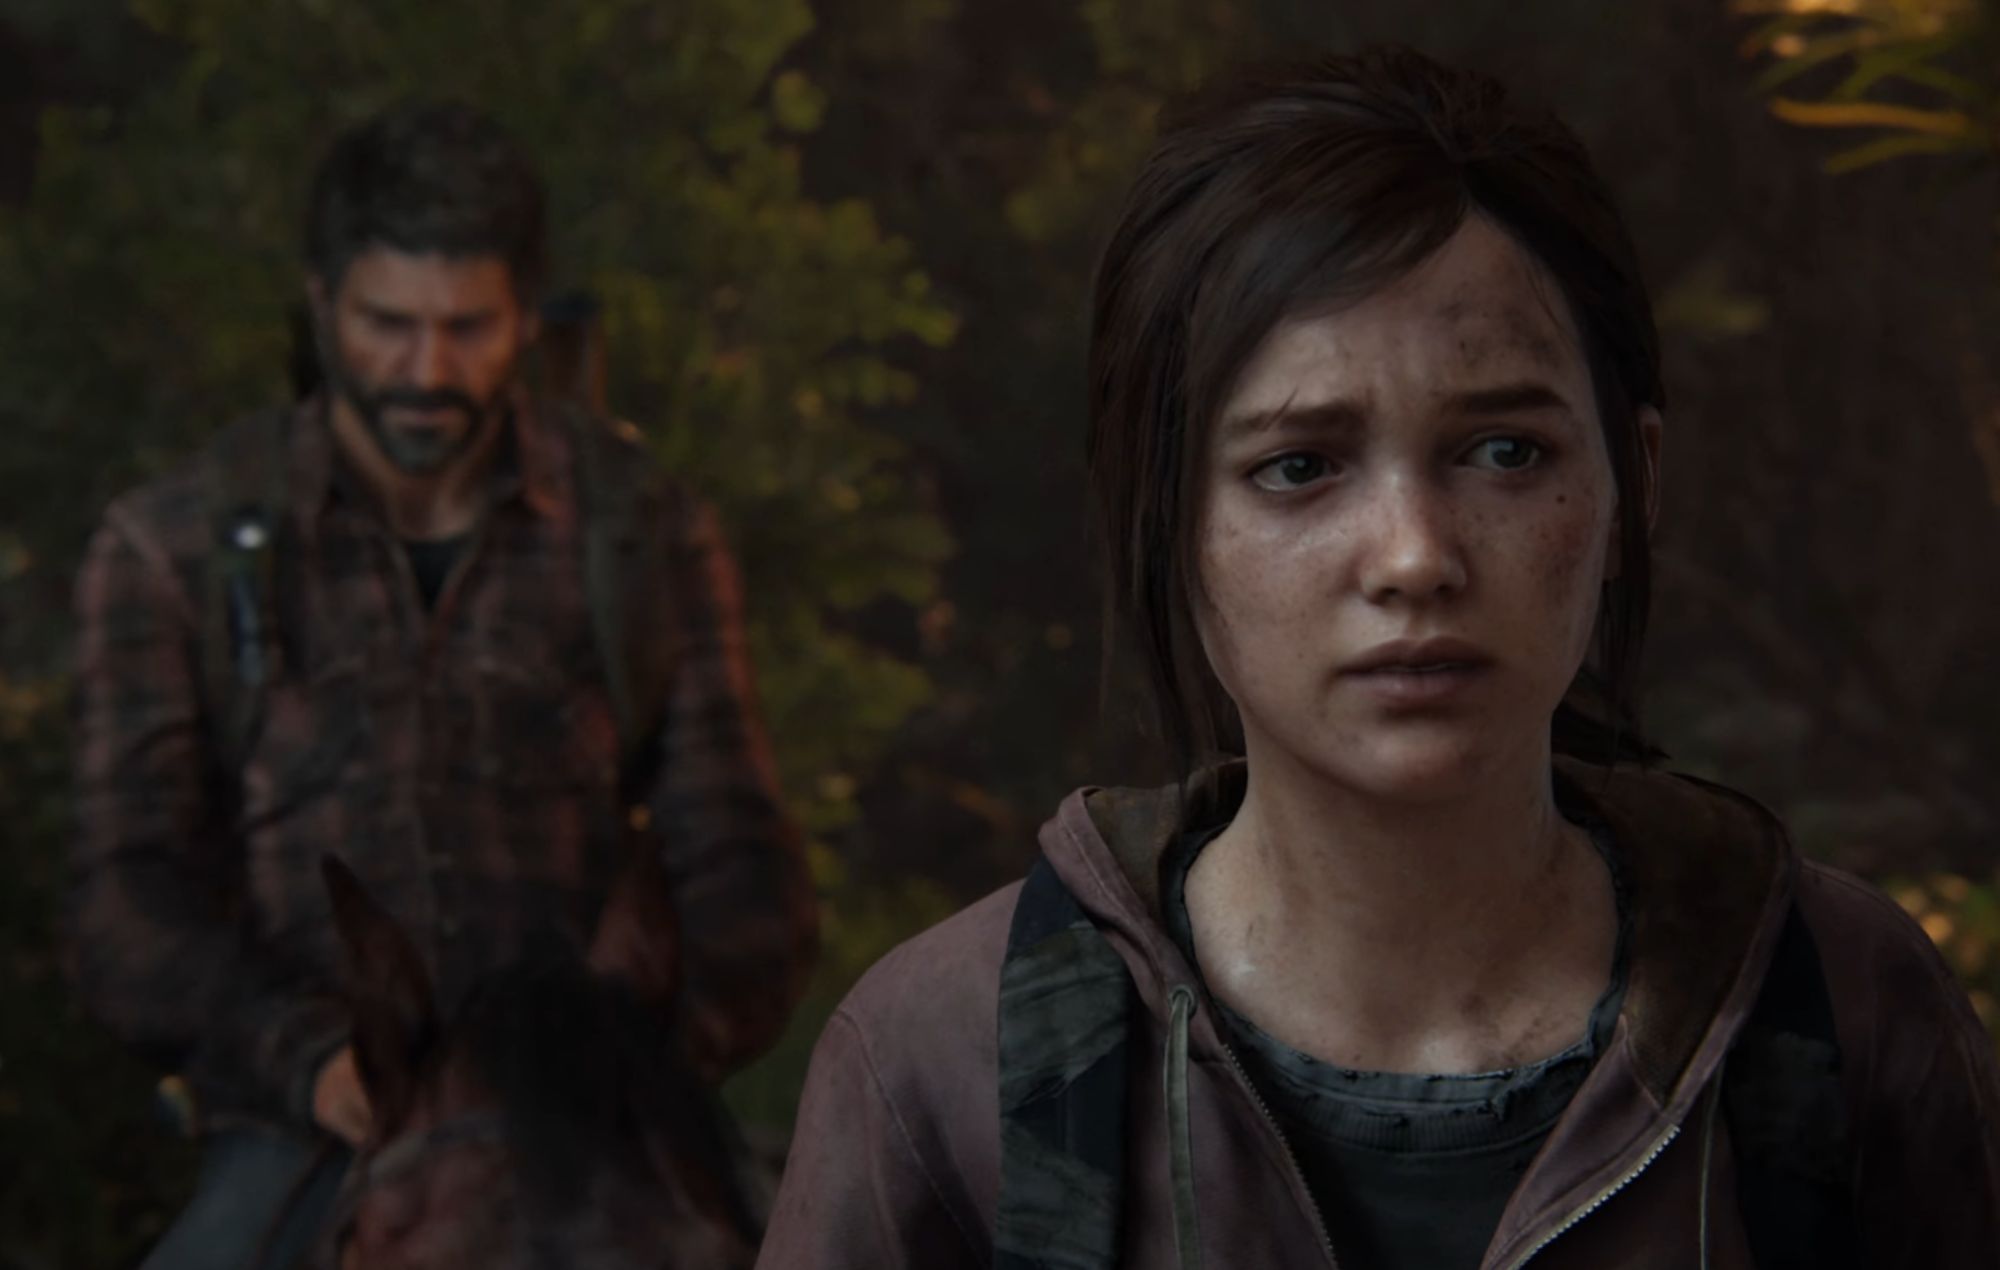 A screenshot of Ellie and Joel from the upcoming The Last of Us Part 1